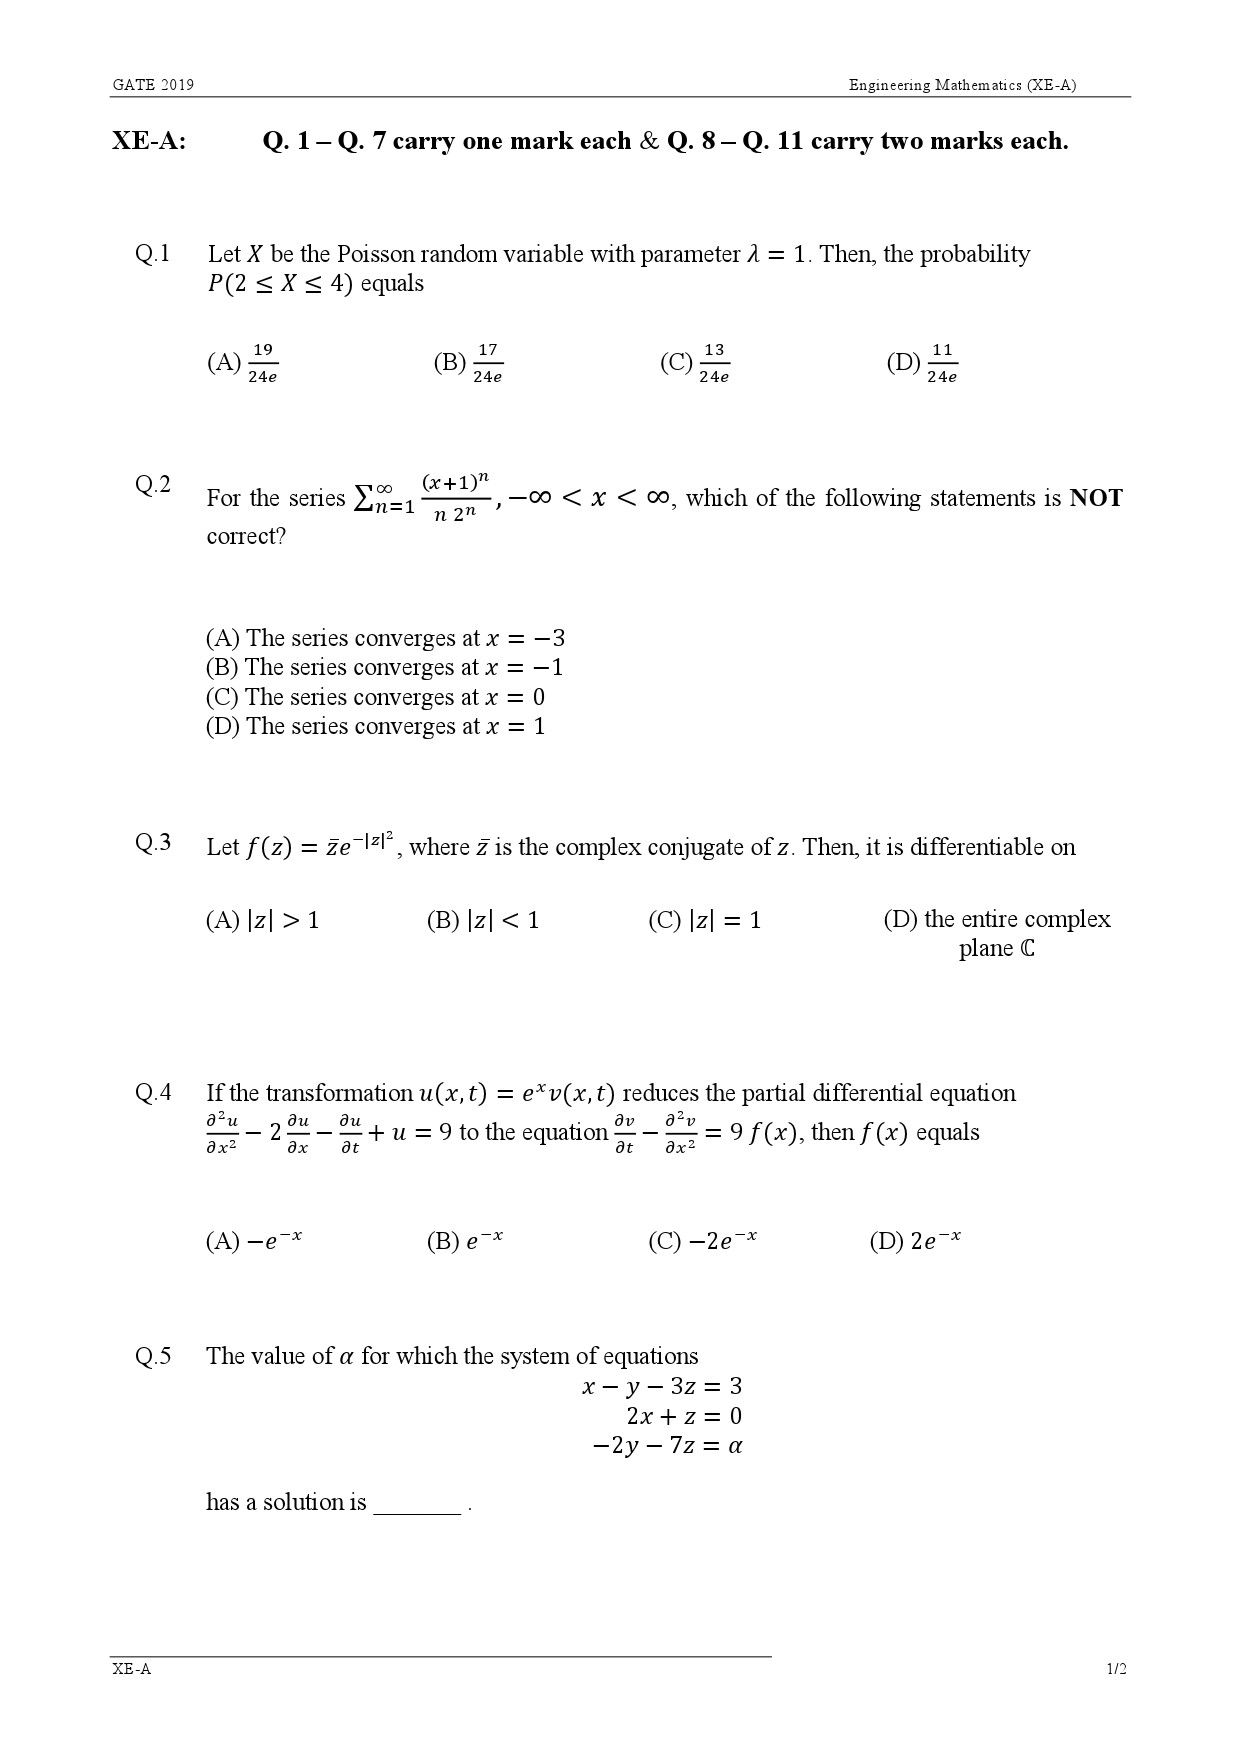 GATE Exam Question Paper 2019 Engineering Sciences 4